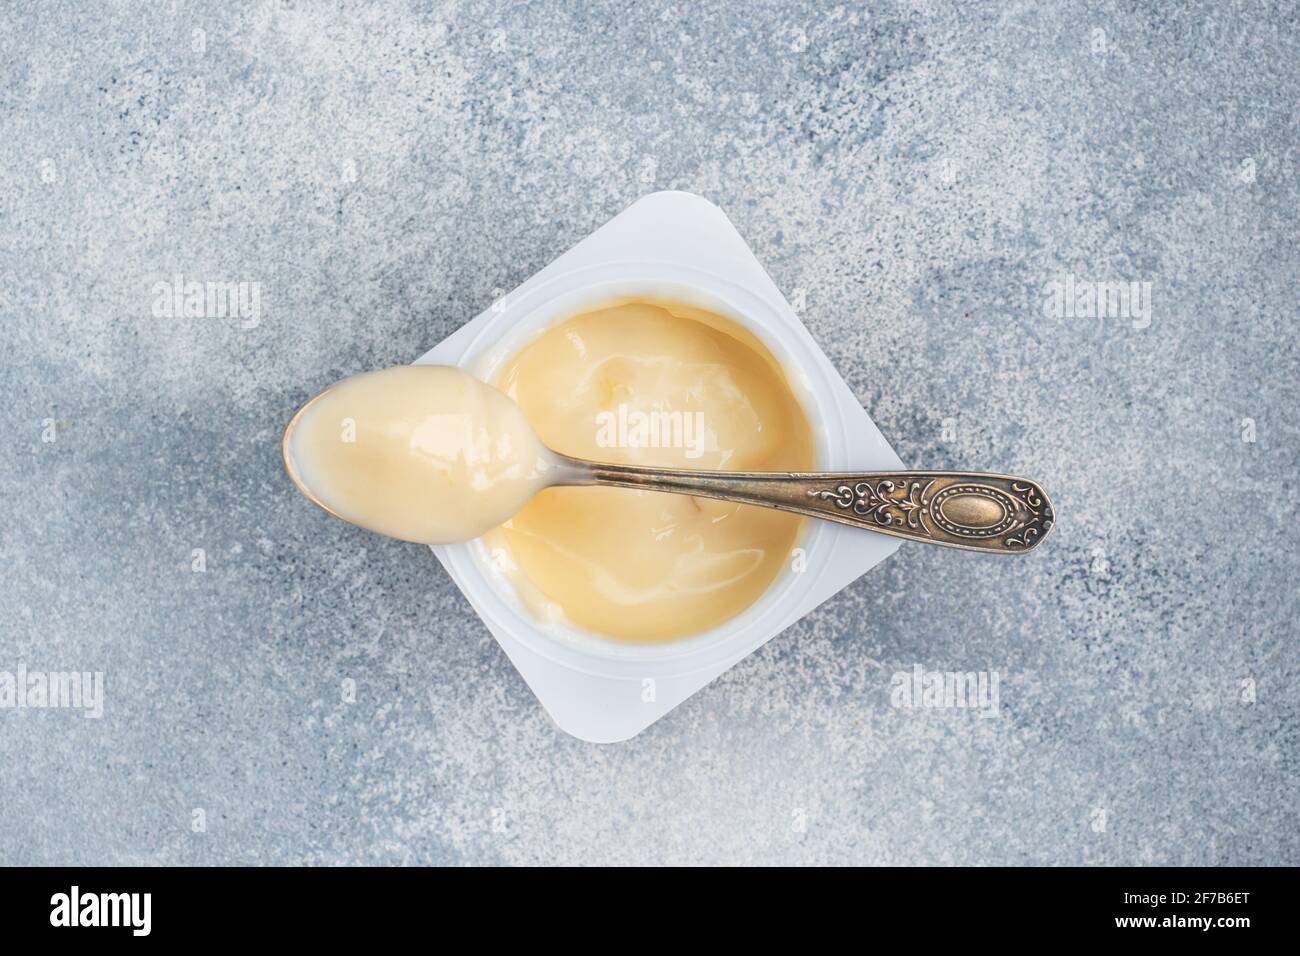 Milk fruit yogurt in an open package and a teaspoon. Gray concrete background, copy space Stock Photo